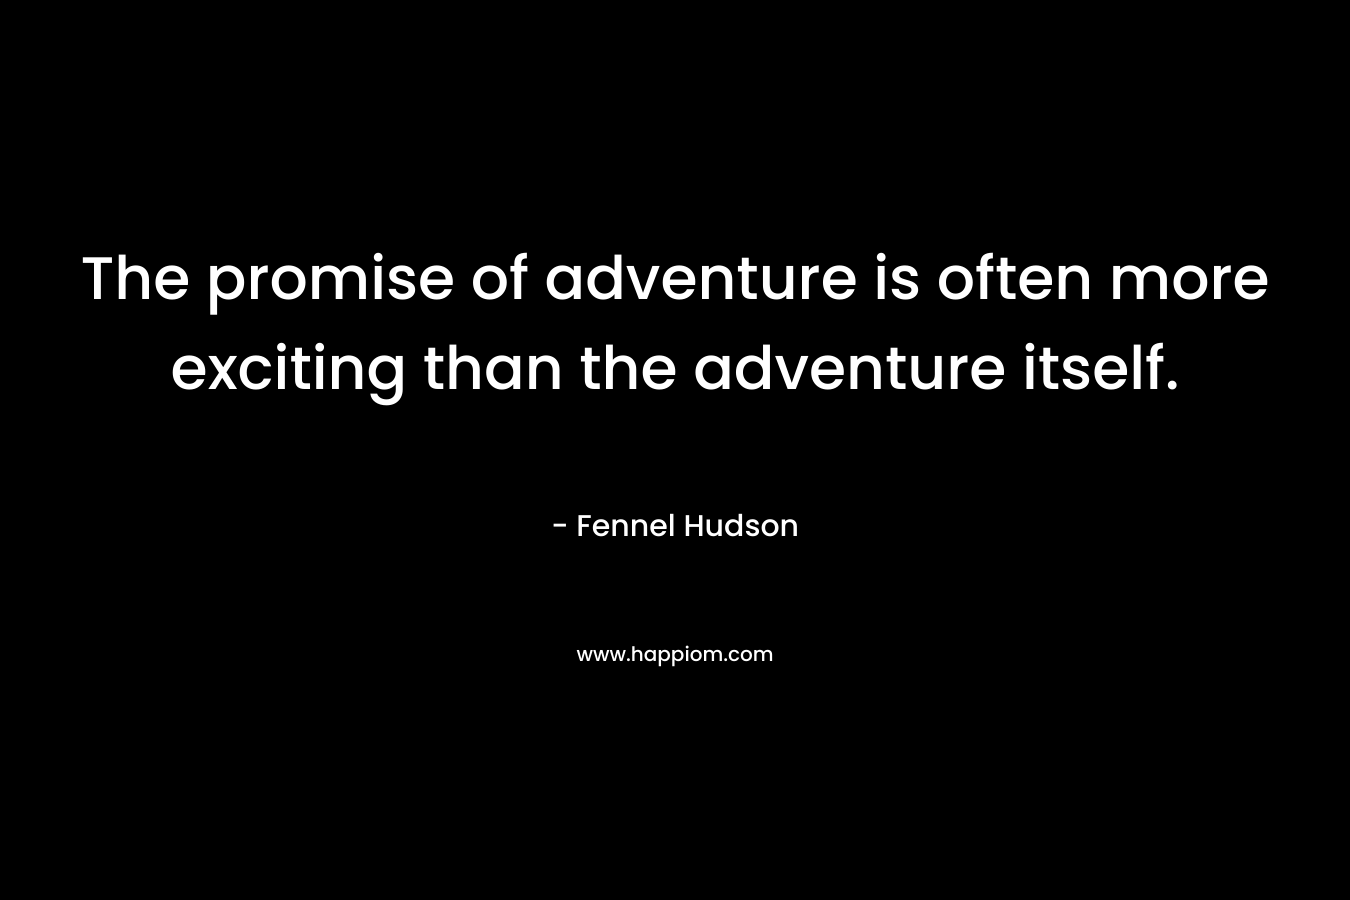 The promise of adventure is often more exciting than the adventure itself.